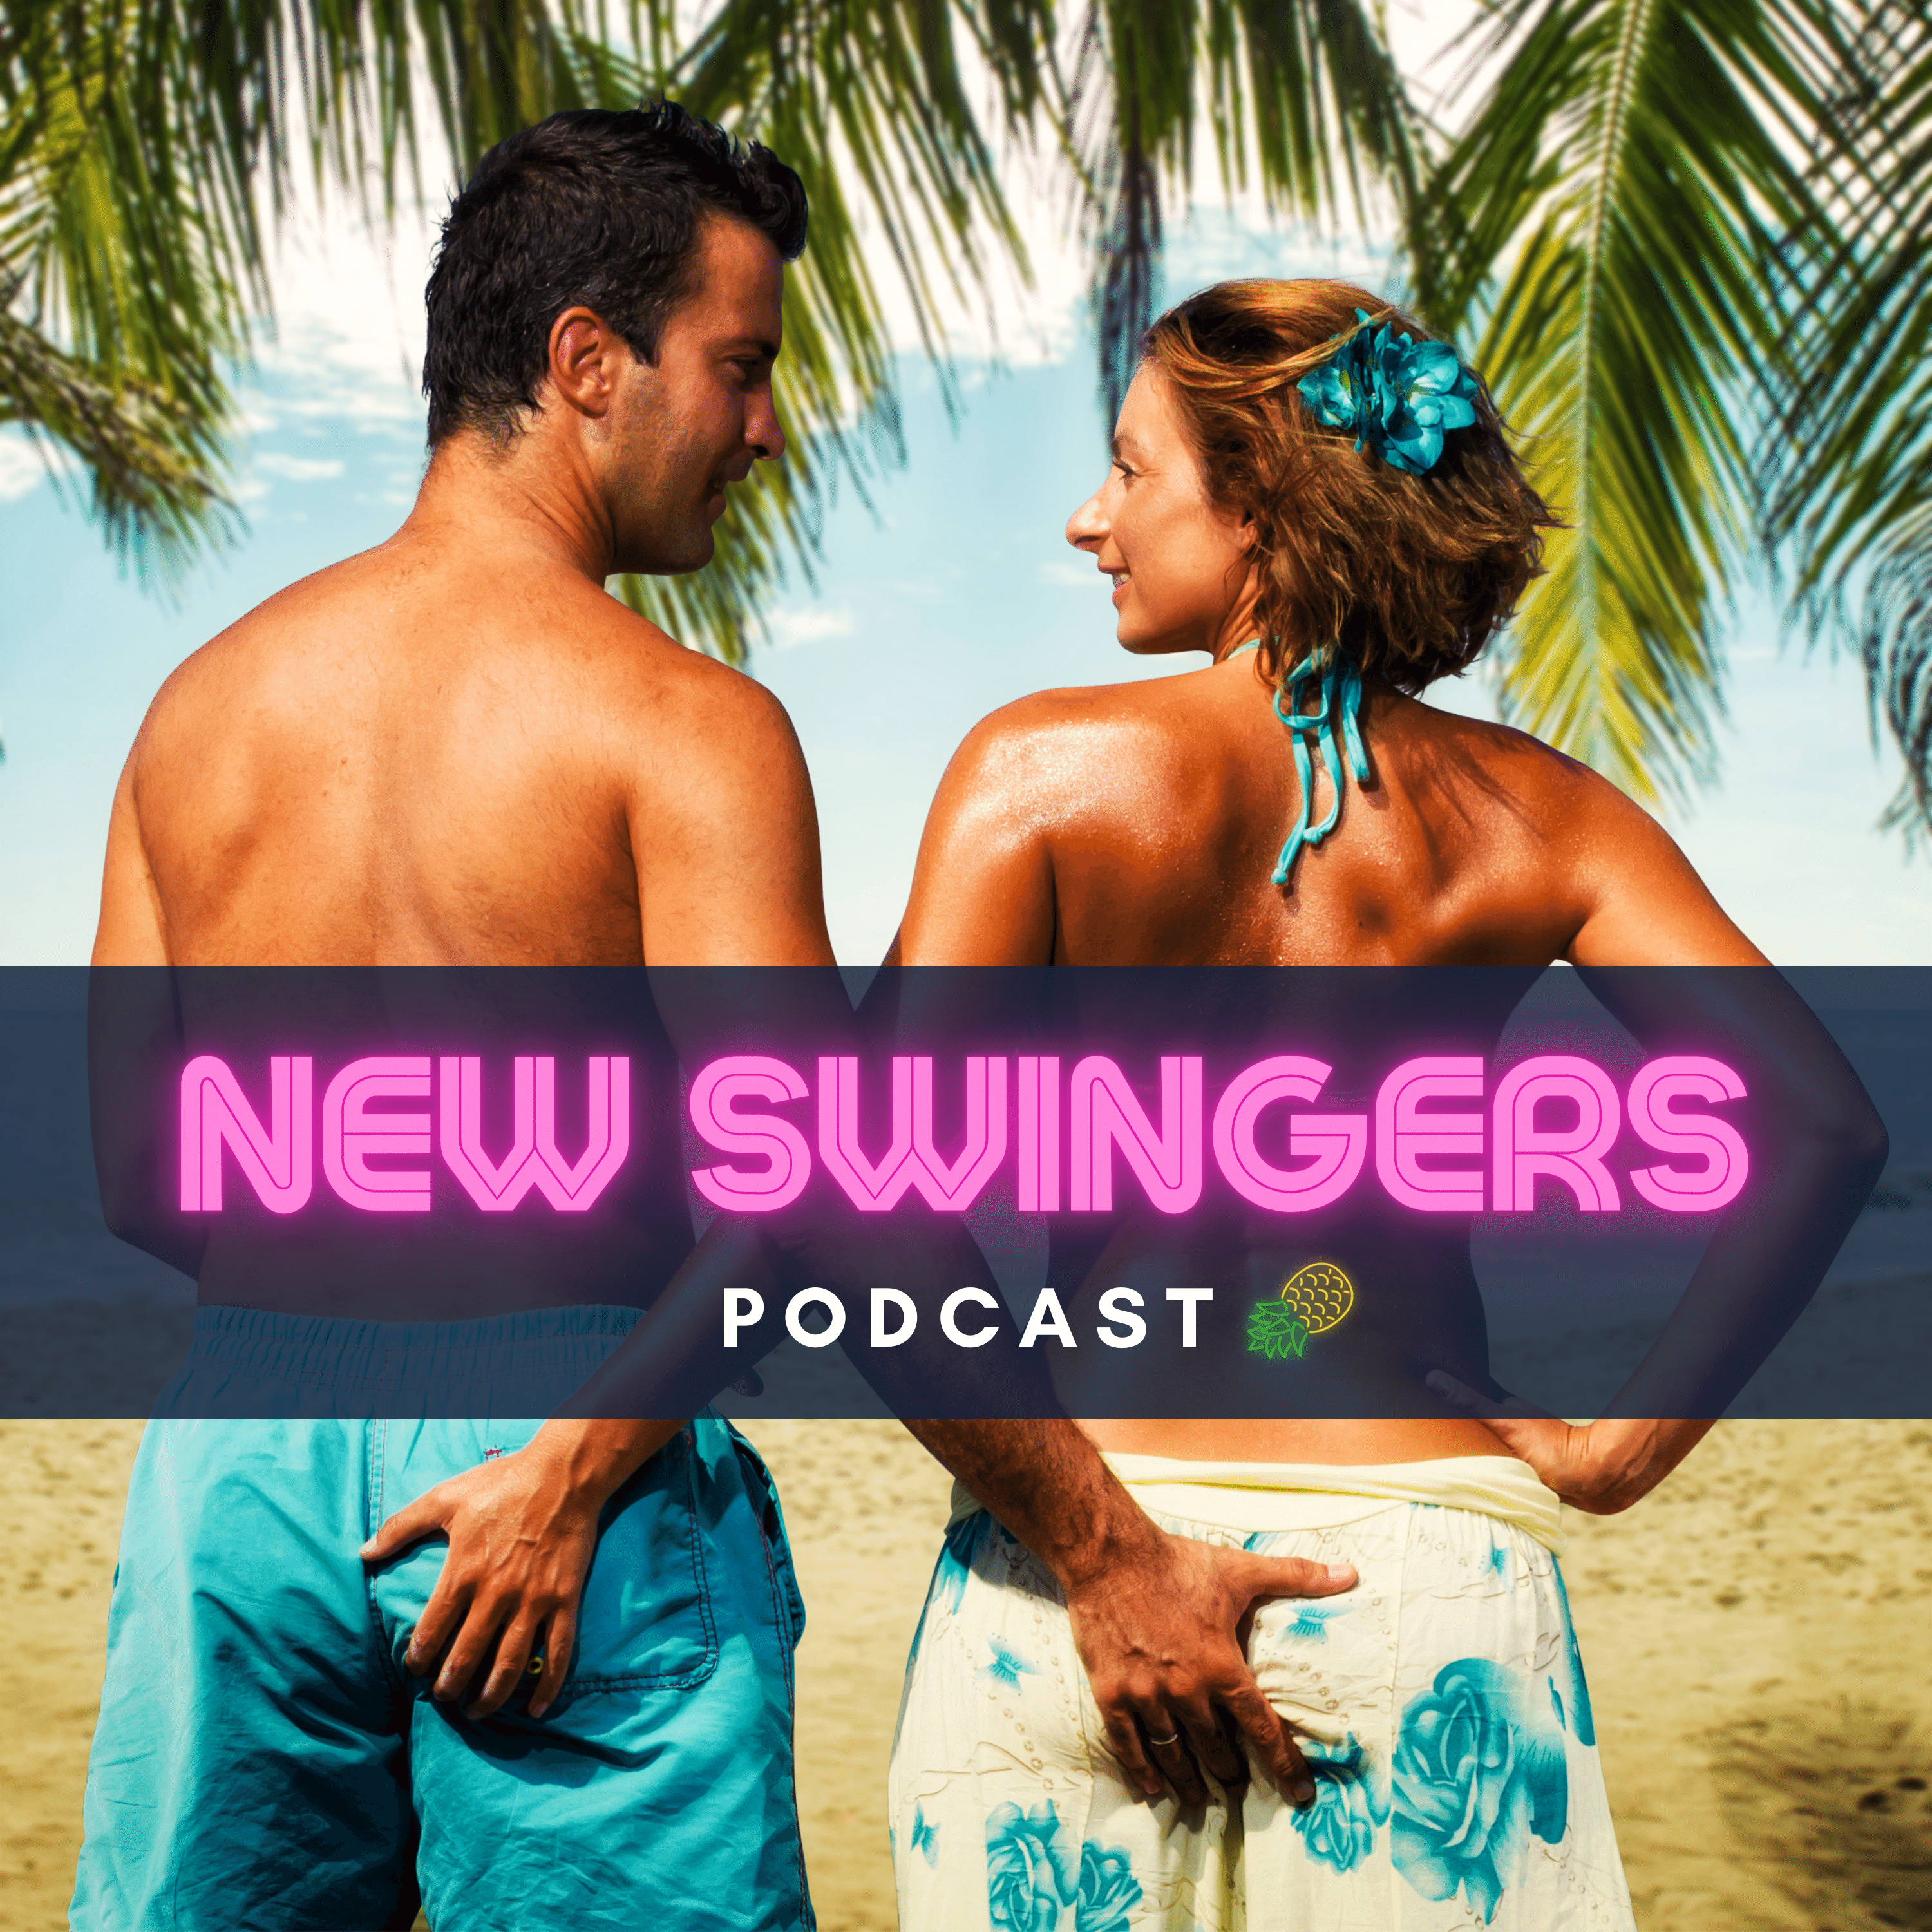 New Swingers Podcast- Practical Advice For New Swinger Couples pic